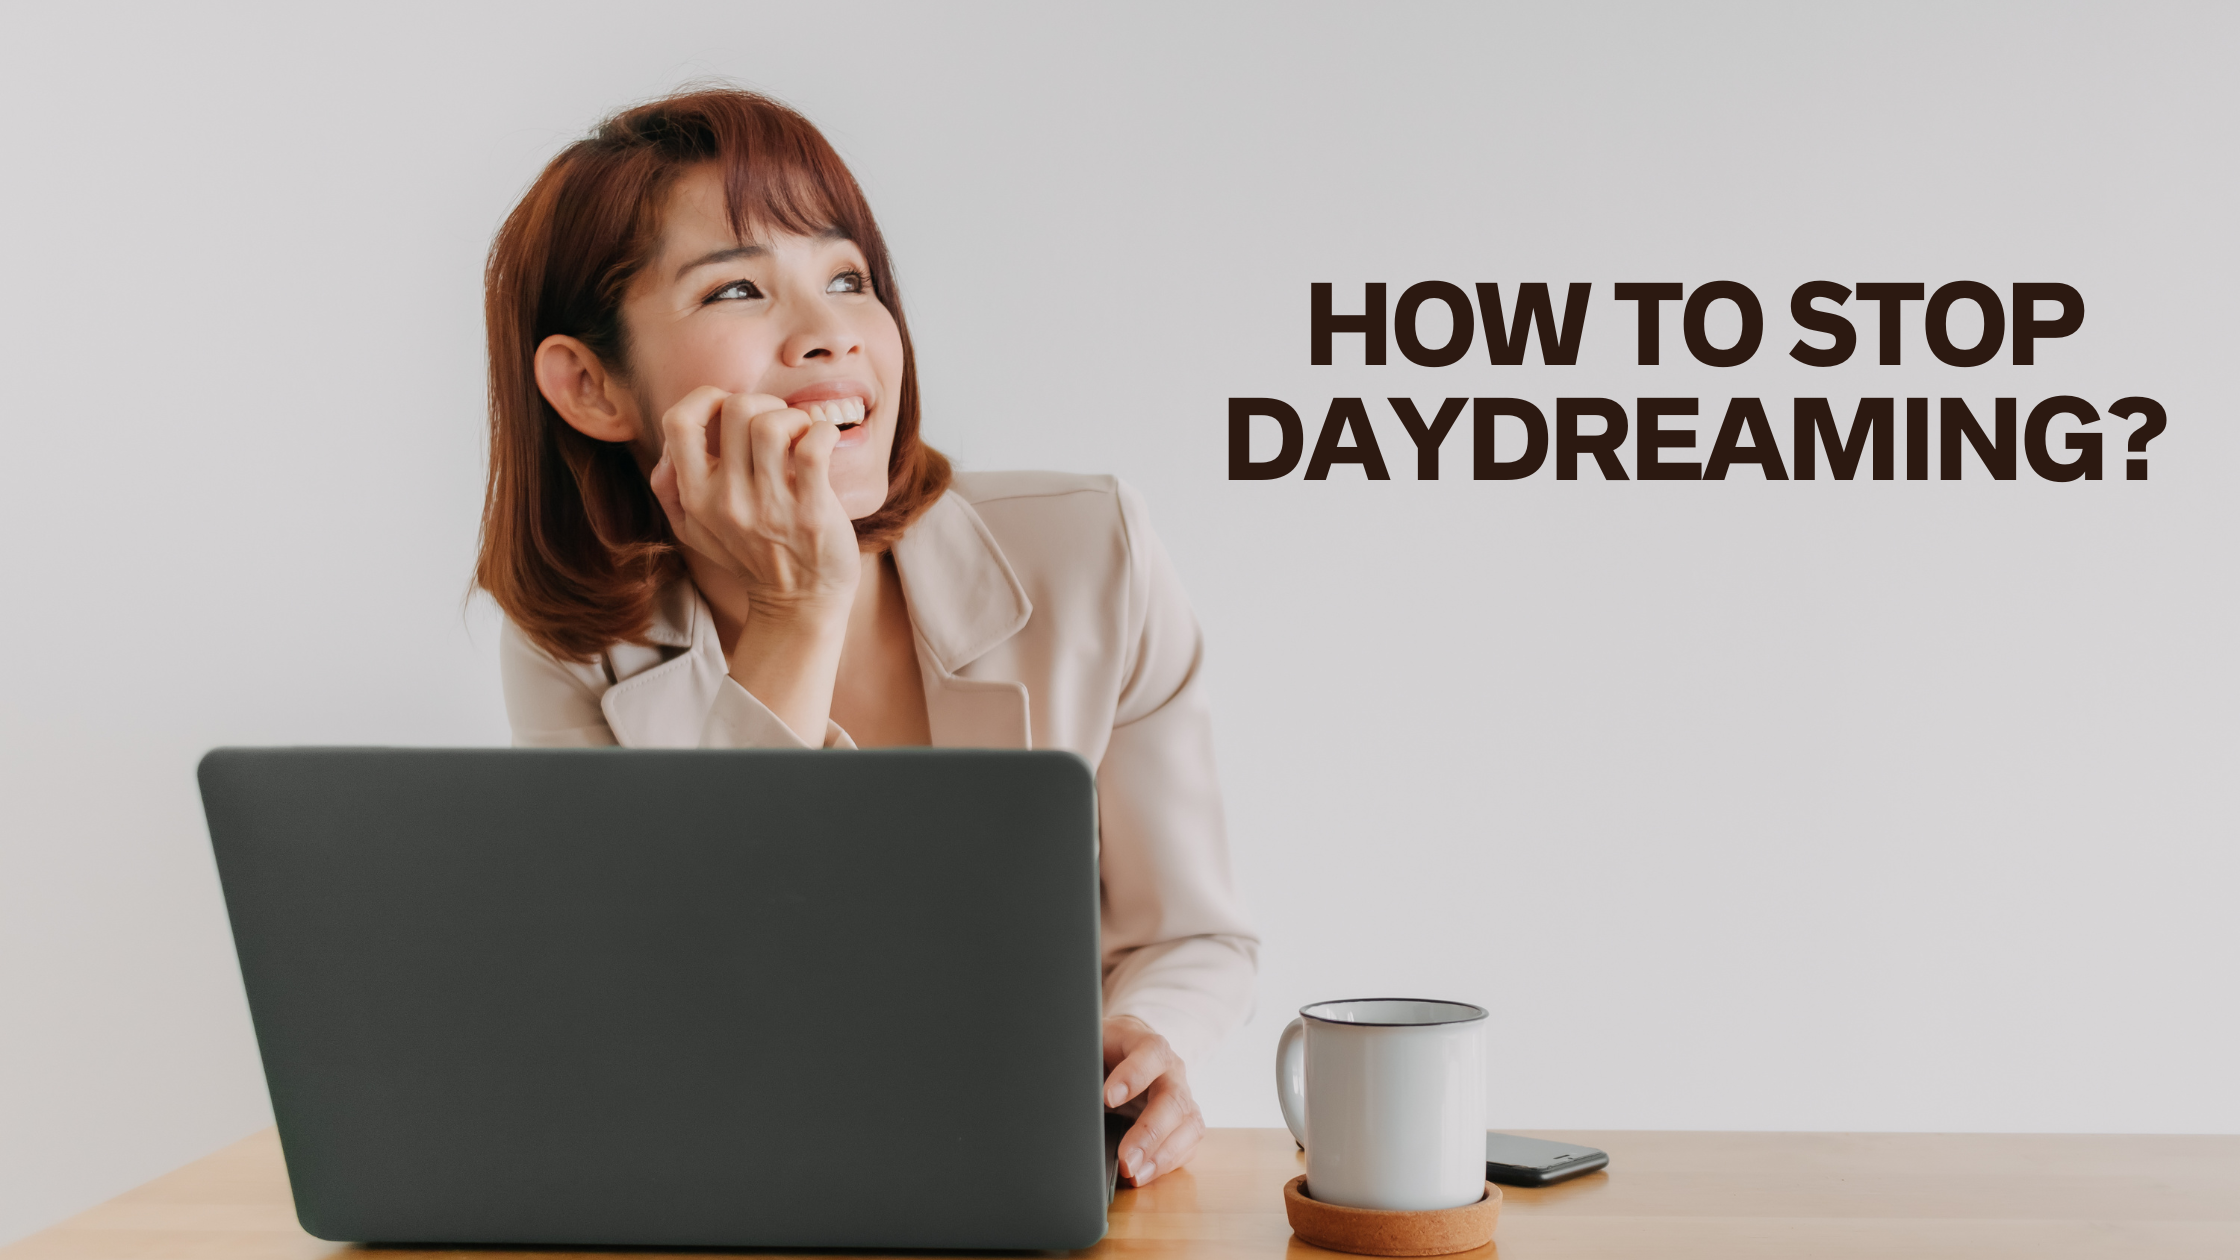 How to Stop Daydreaming